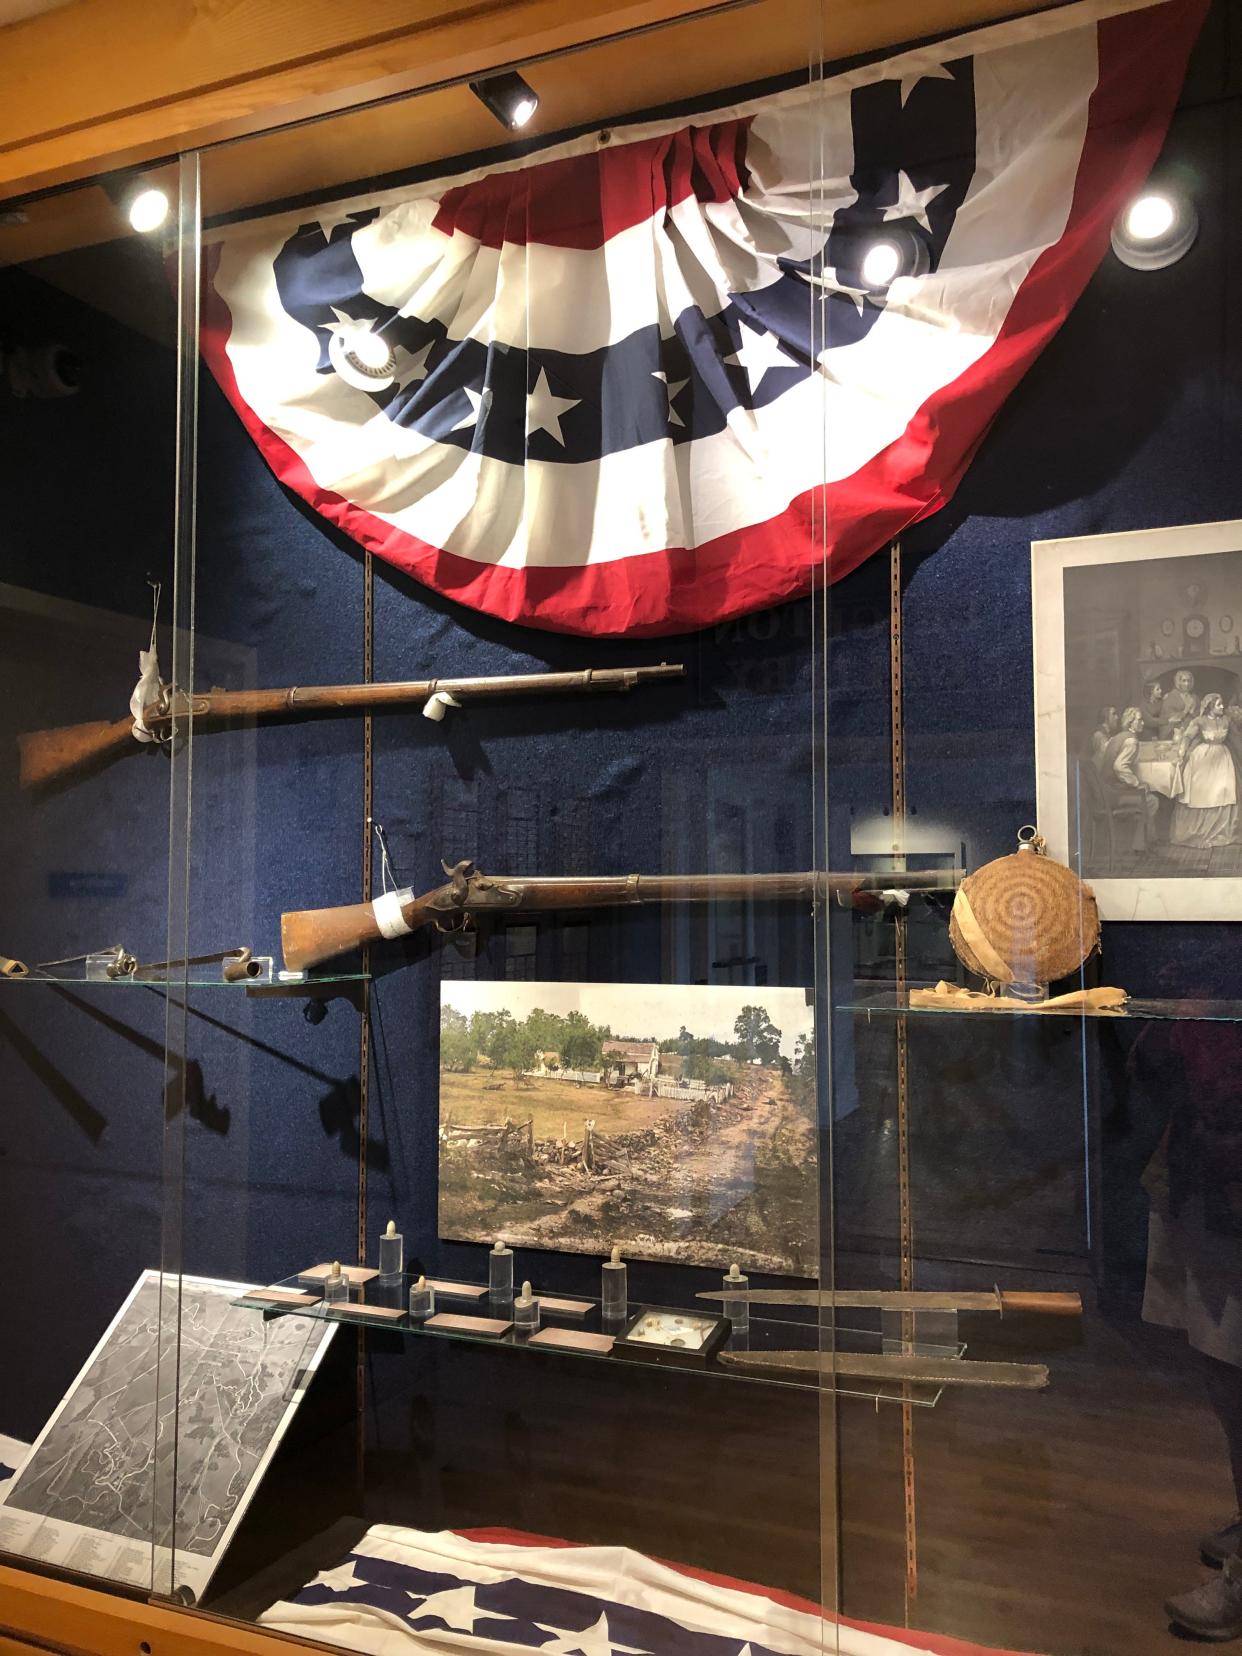 Photos and artifacts included in this case as part of the exhibit "Turning Point: The Battle of Gettysburg, 1863" are a colorized photograph of the aftermath of the Gettysburg three-day battle; an 1864 Springfield rife, standard equipment in the Union Army; and an 1860s battlefield map of Gettysburg. The exhibit will be open from July 1, 2023, to July 7, 2024, at The History Museum in South Bend.